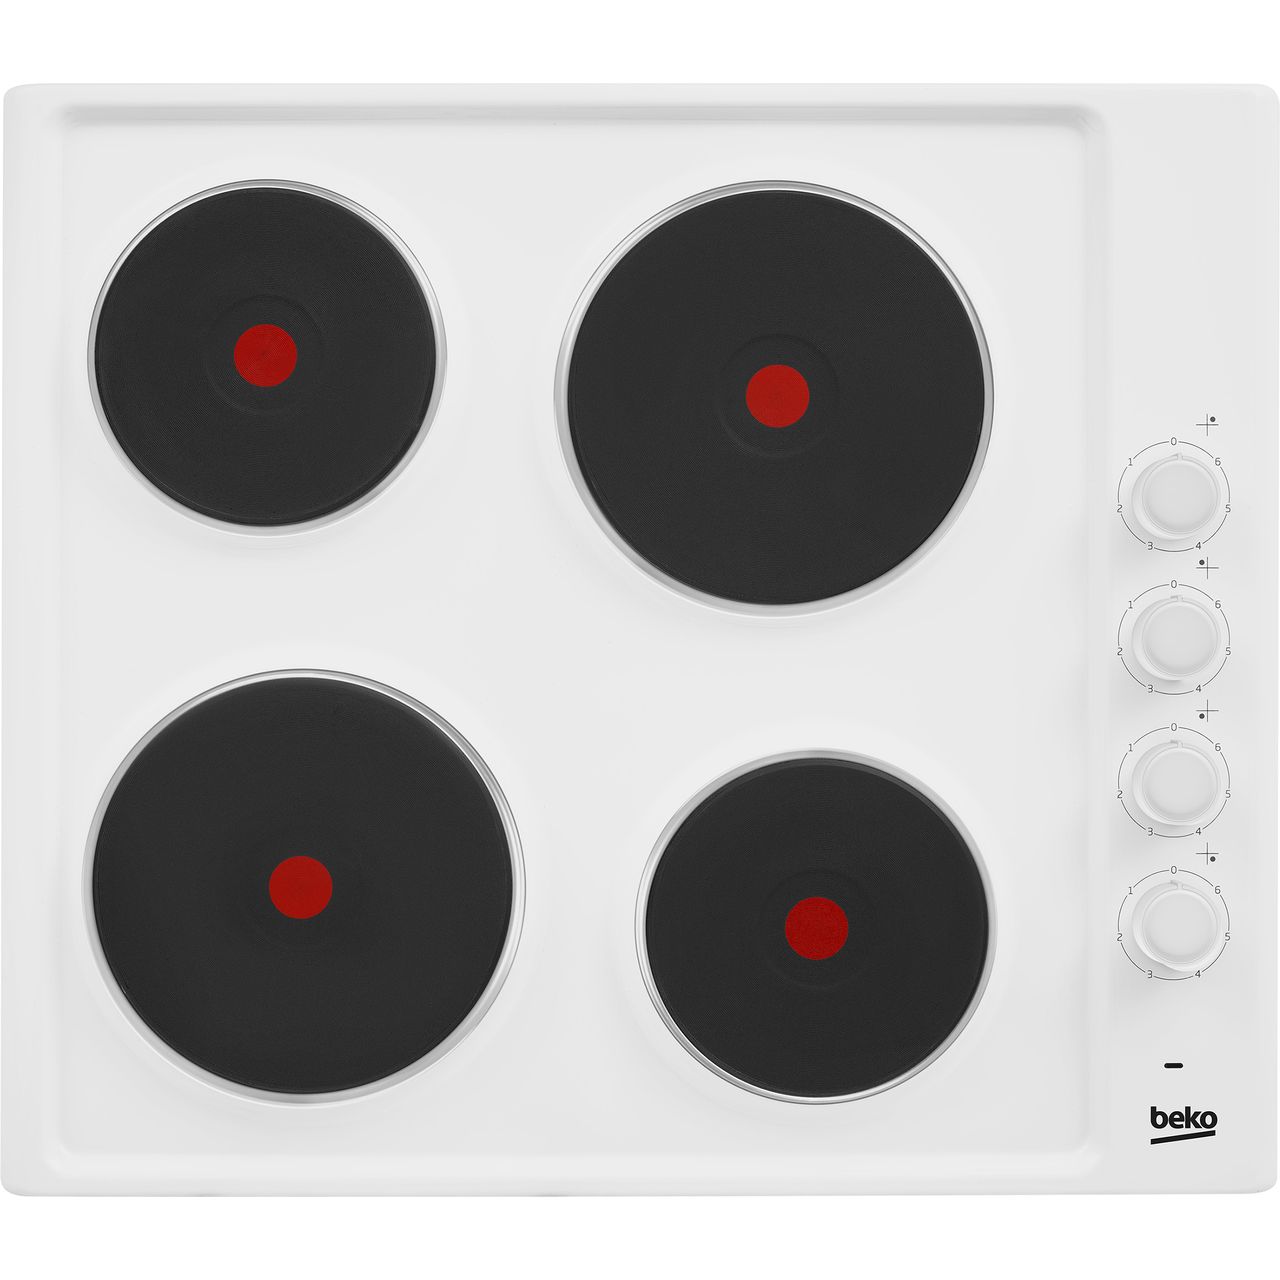 Beko HIZE64101W 58cm Solid Plate Hob Review